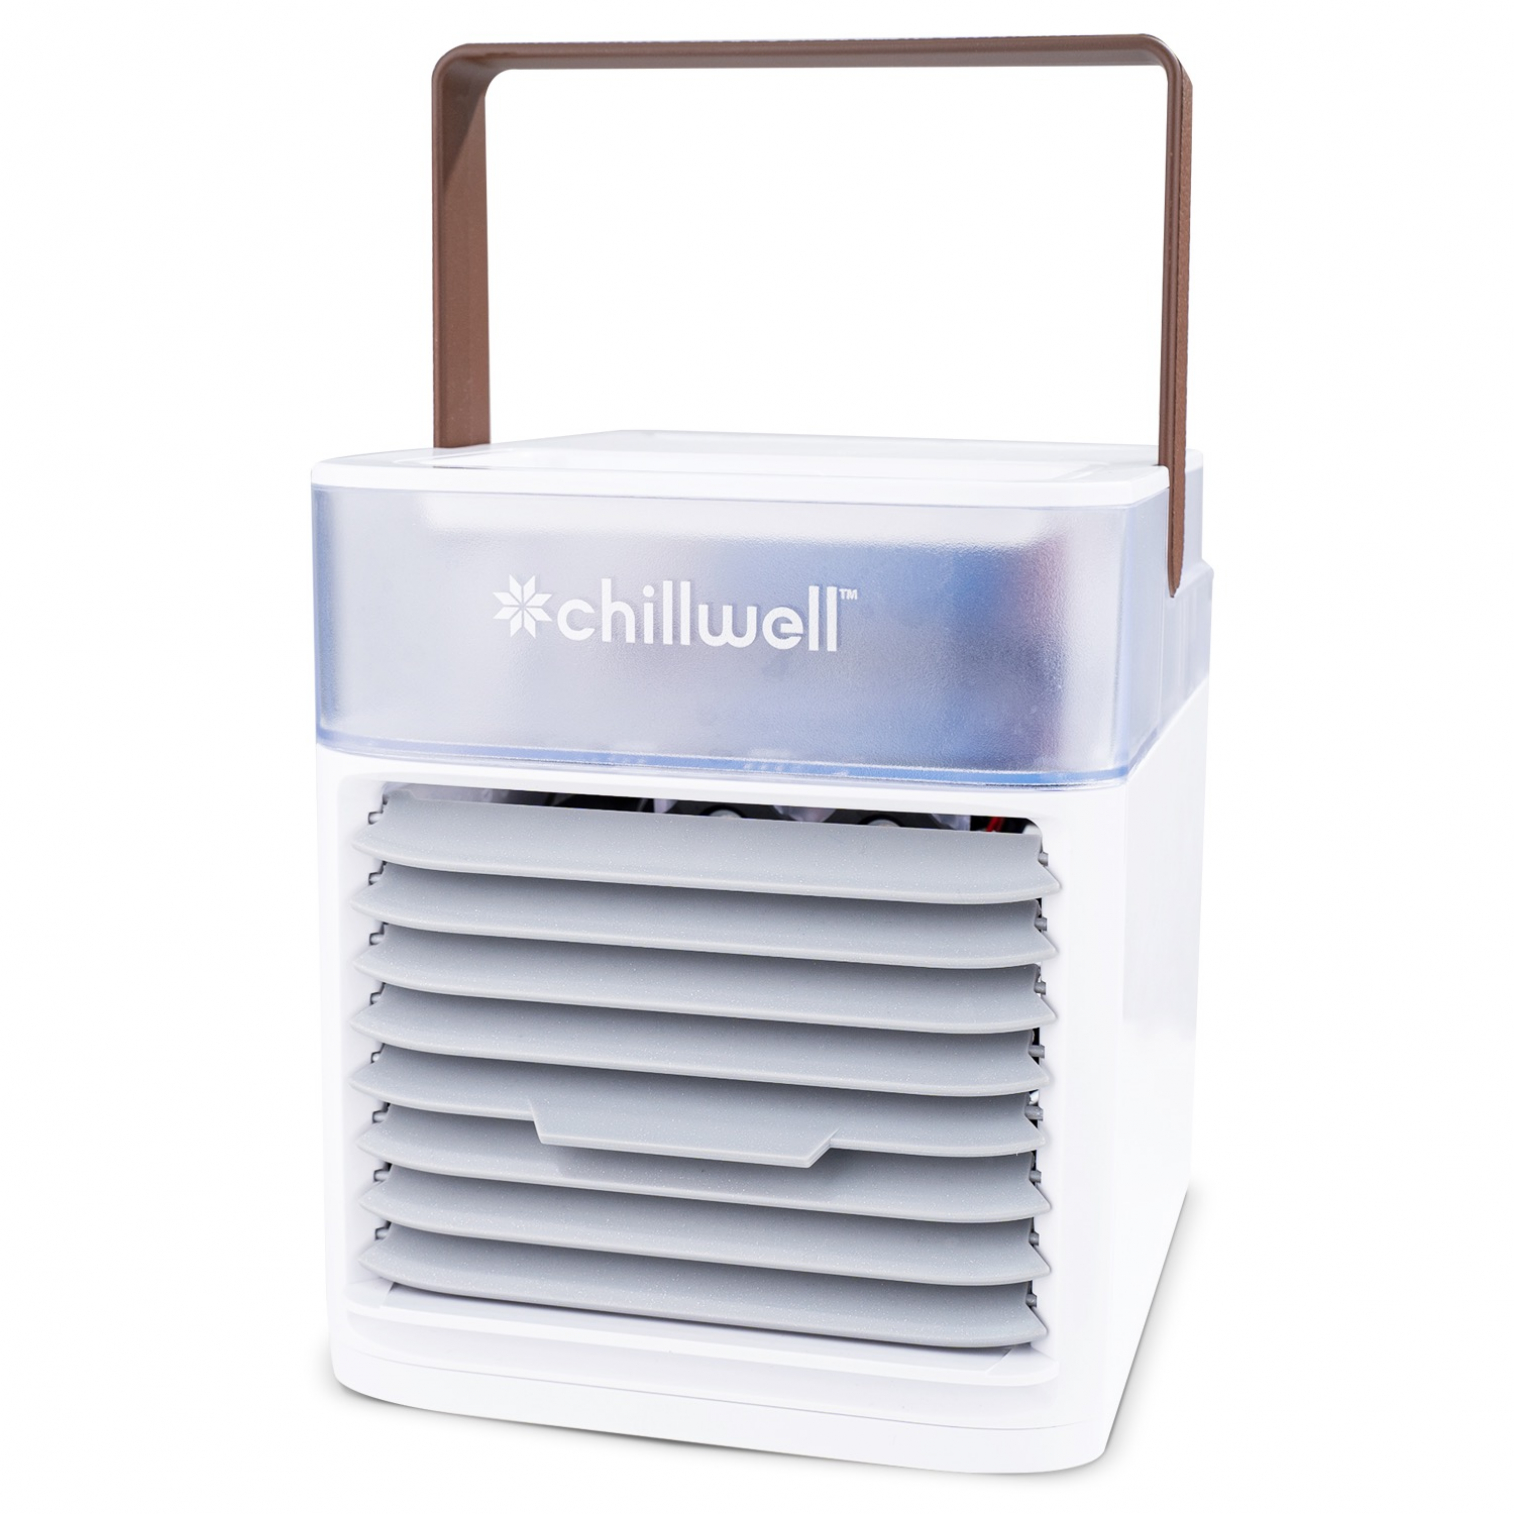 Chilwell Portable Ac Review